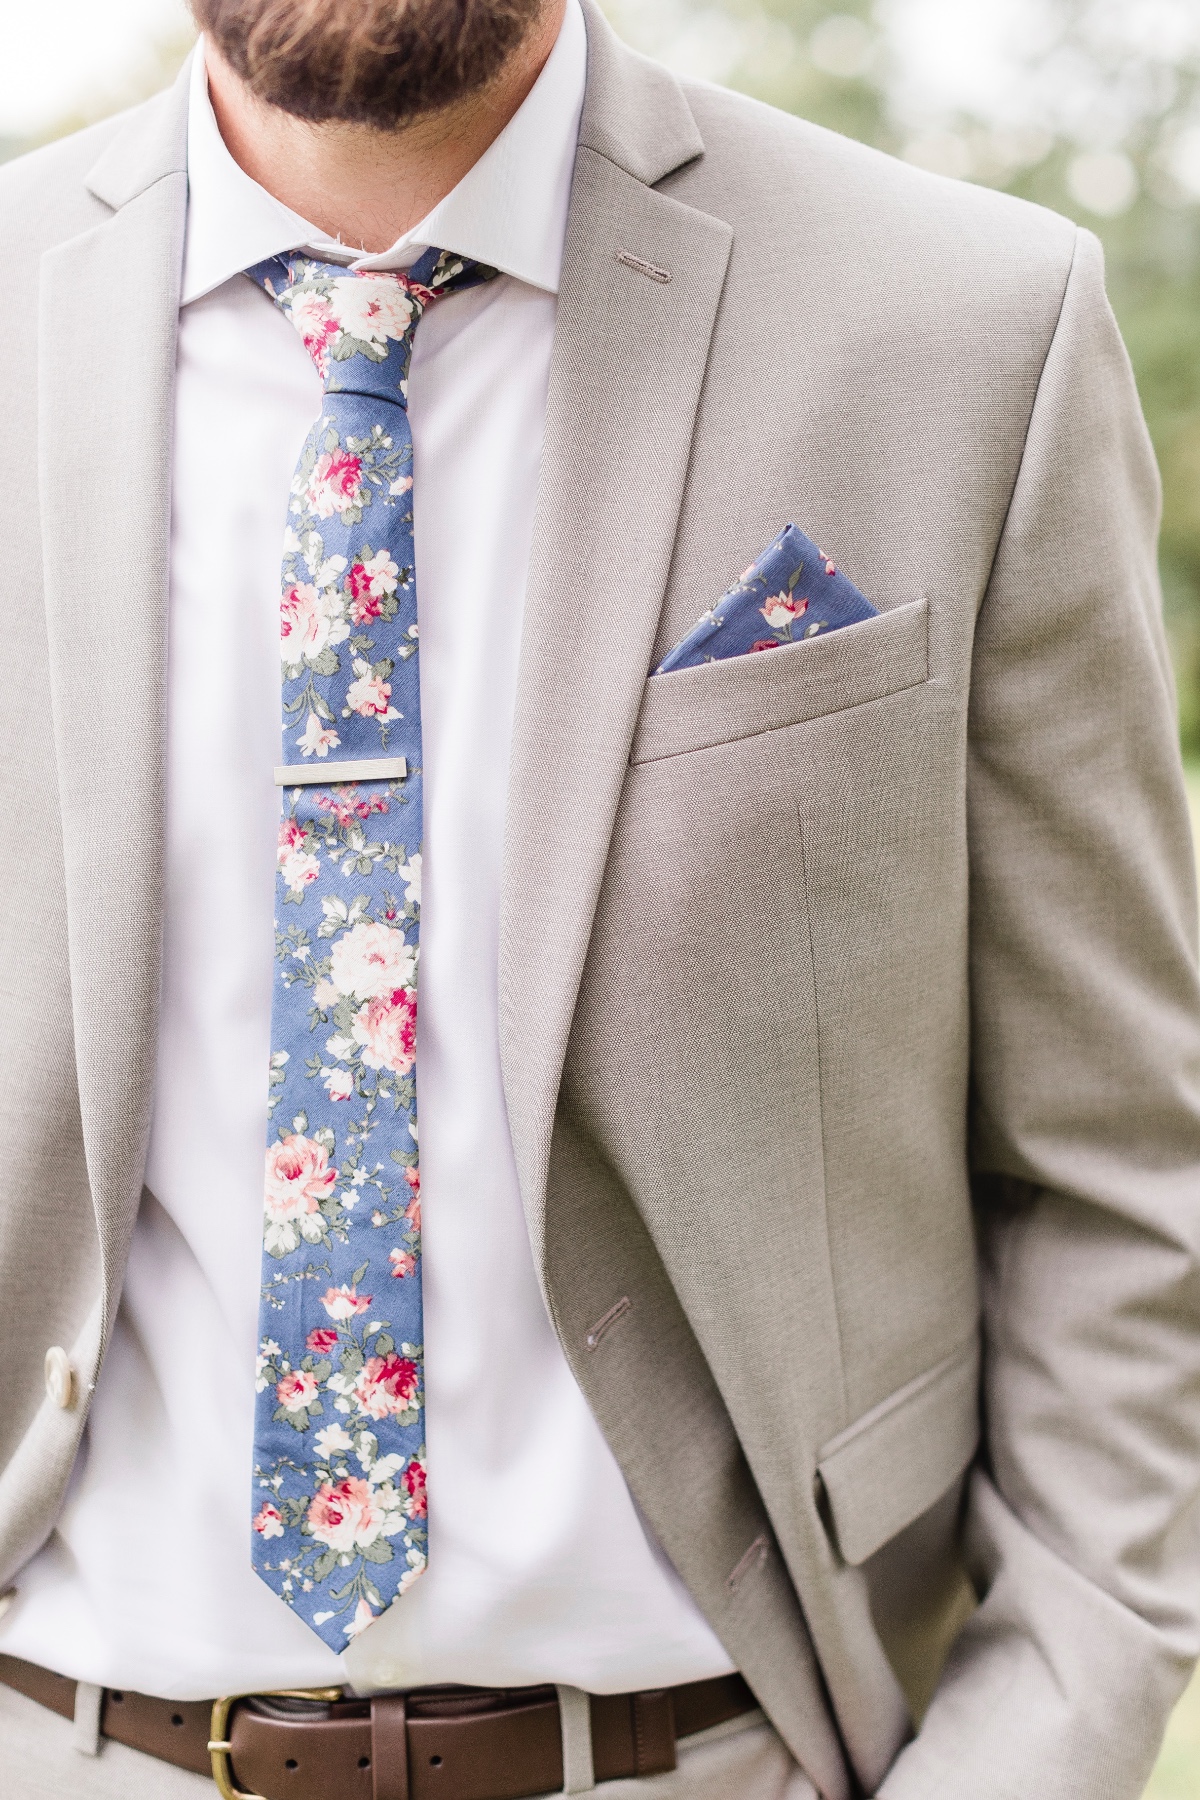 floral tie and pocket square